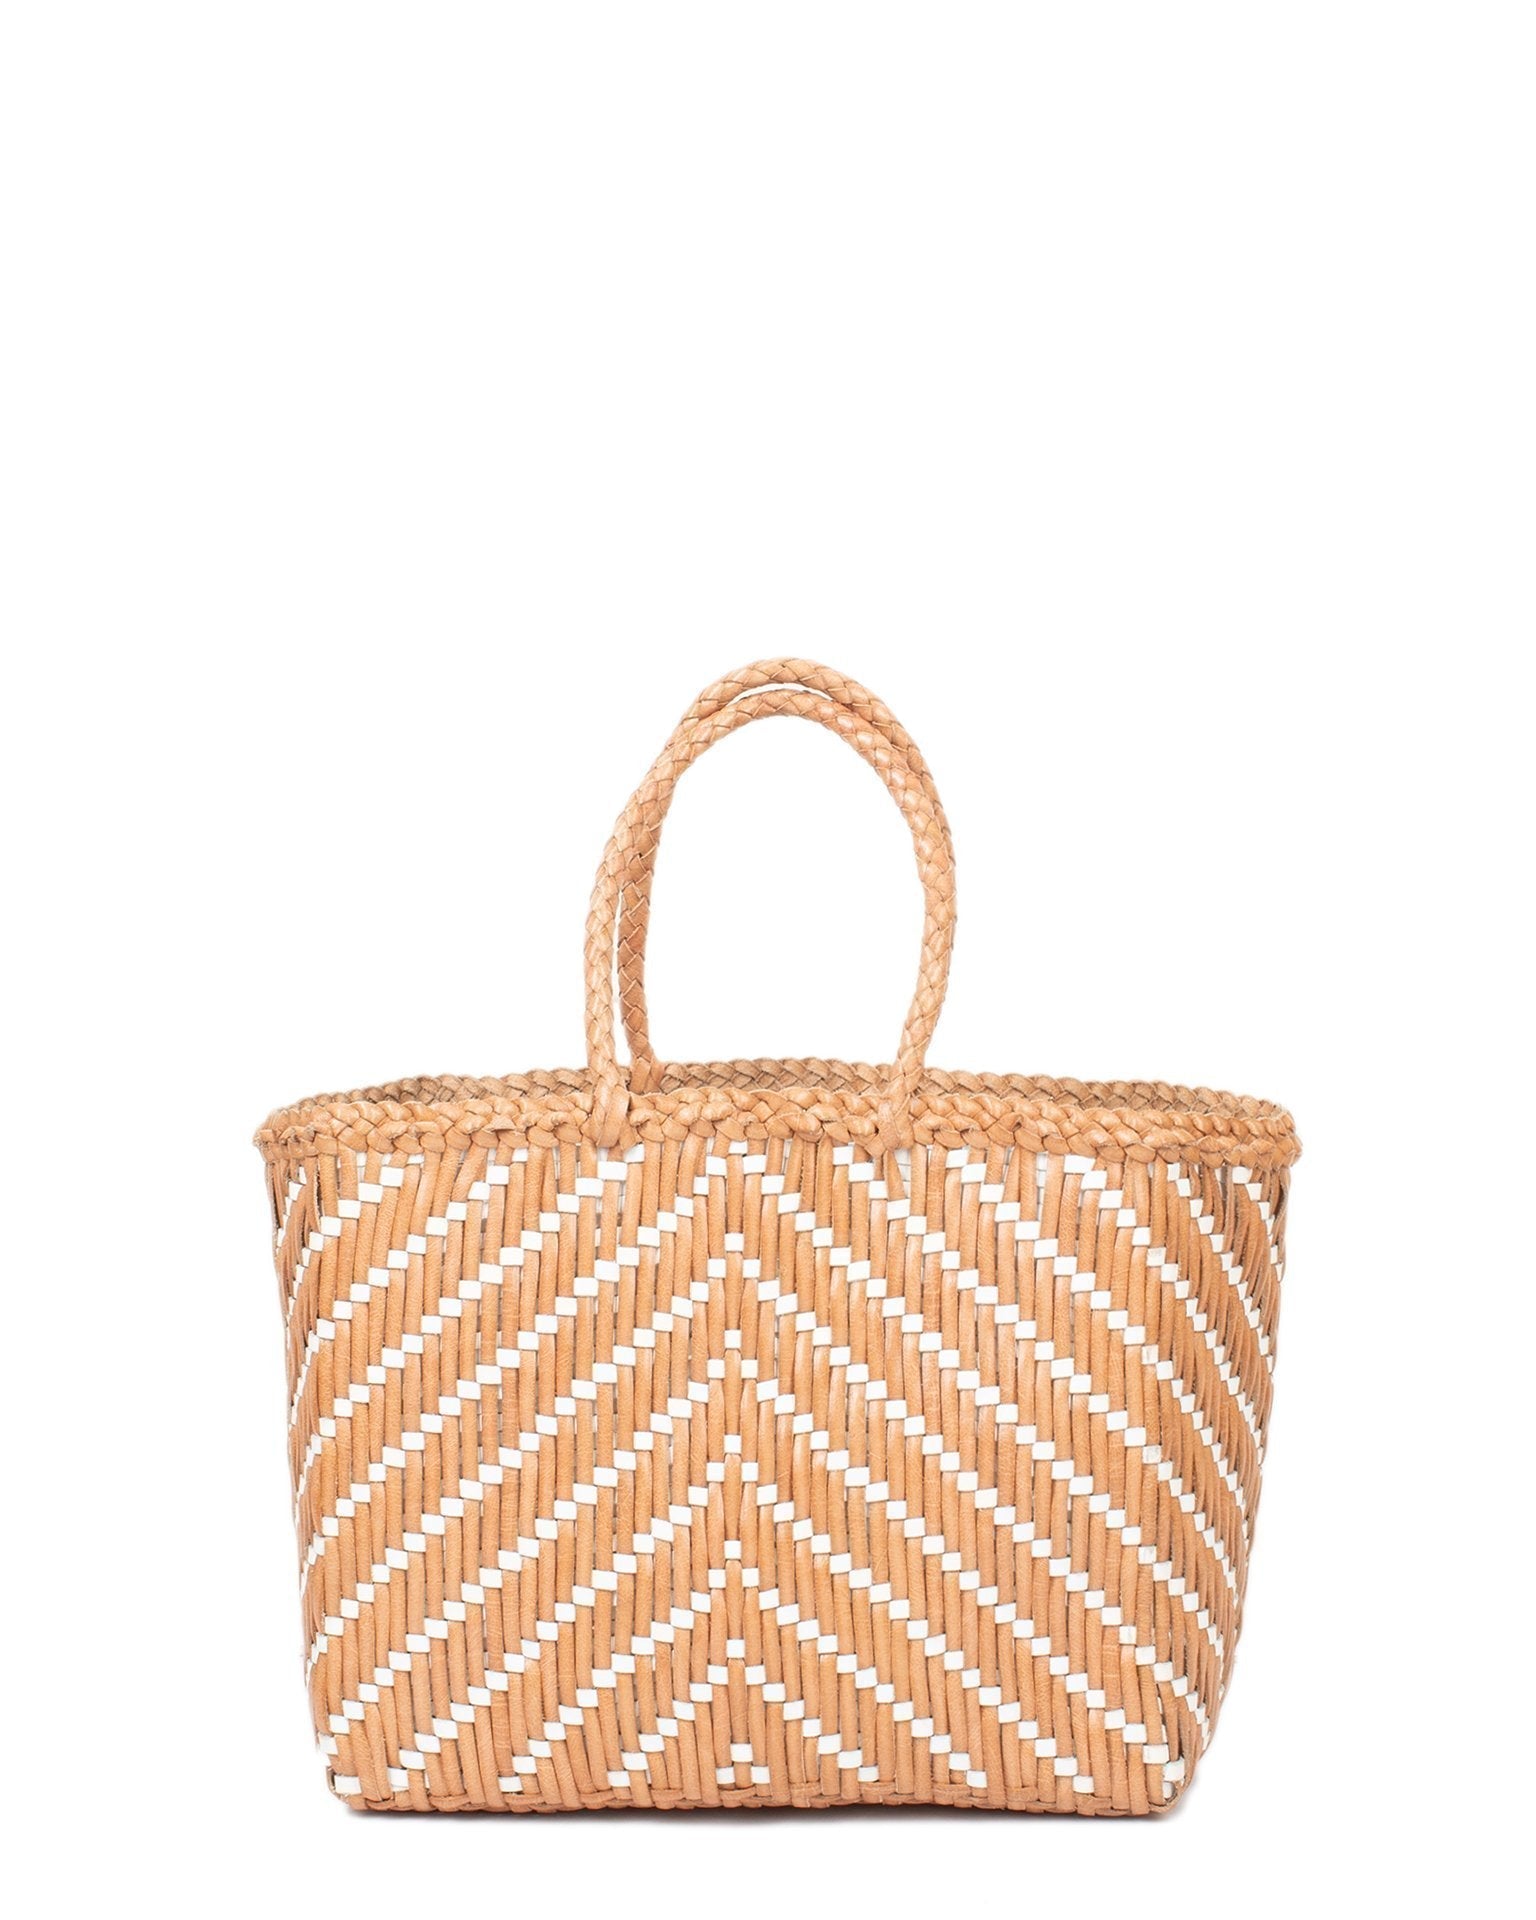 Clare V. Sandy Woven Bag in Black - Bliss Boutiques